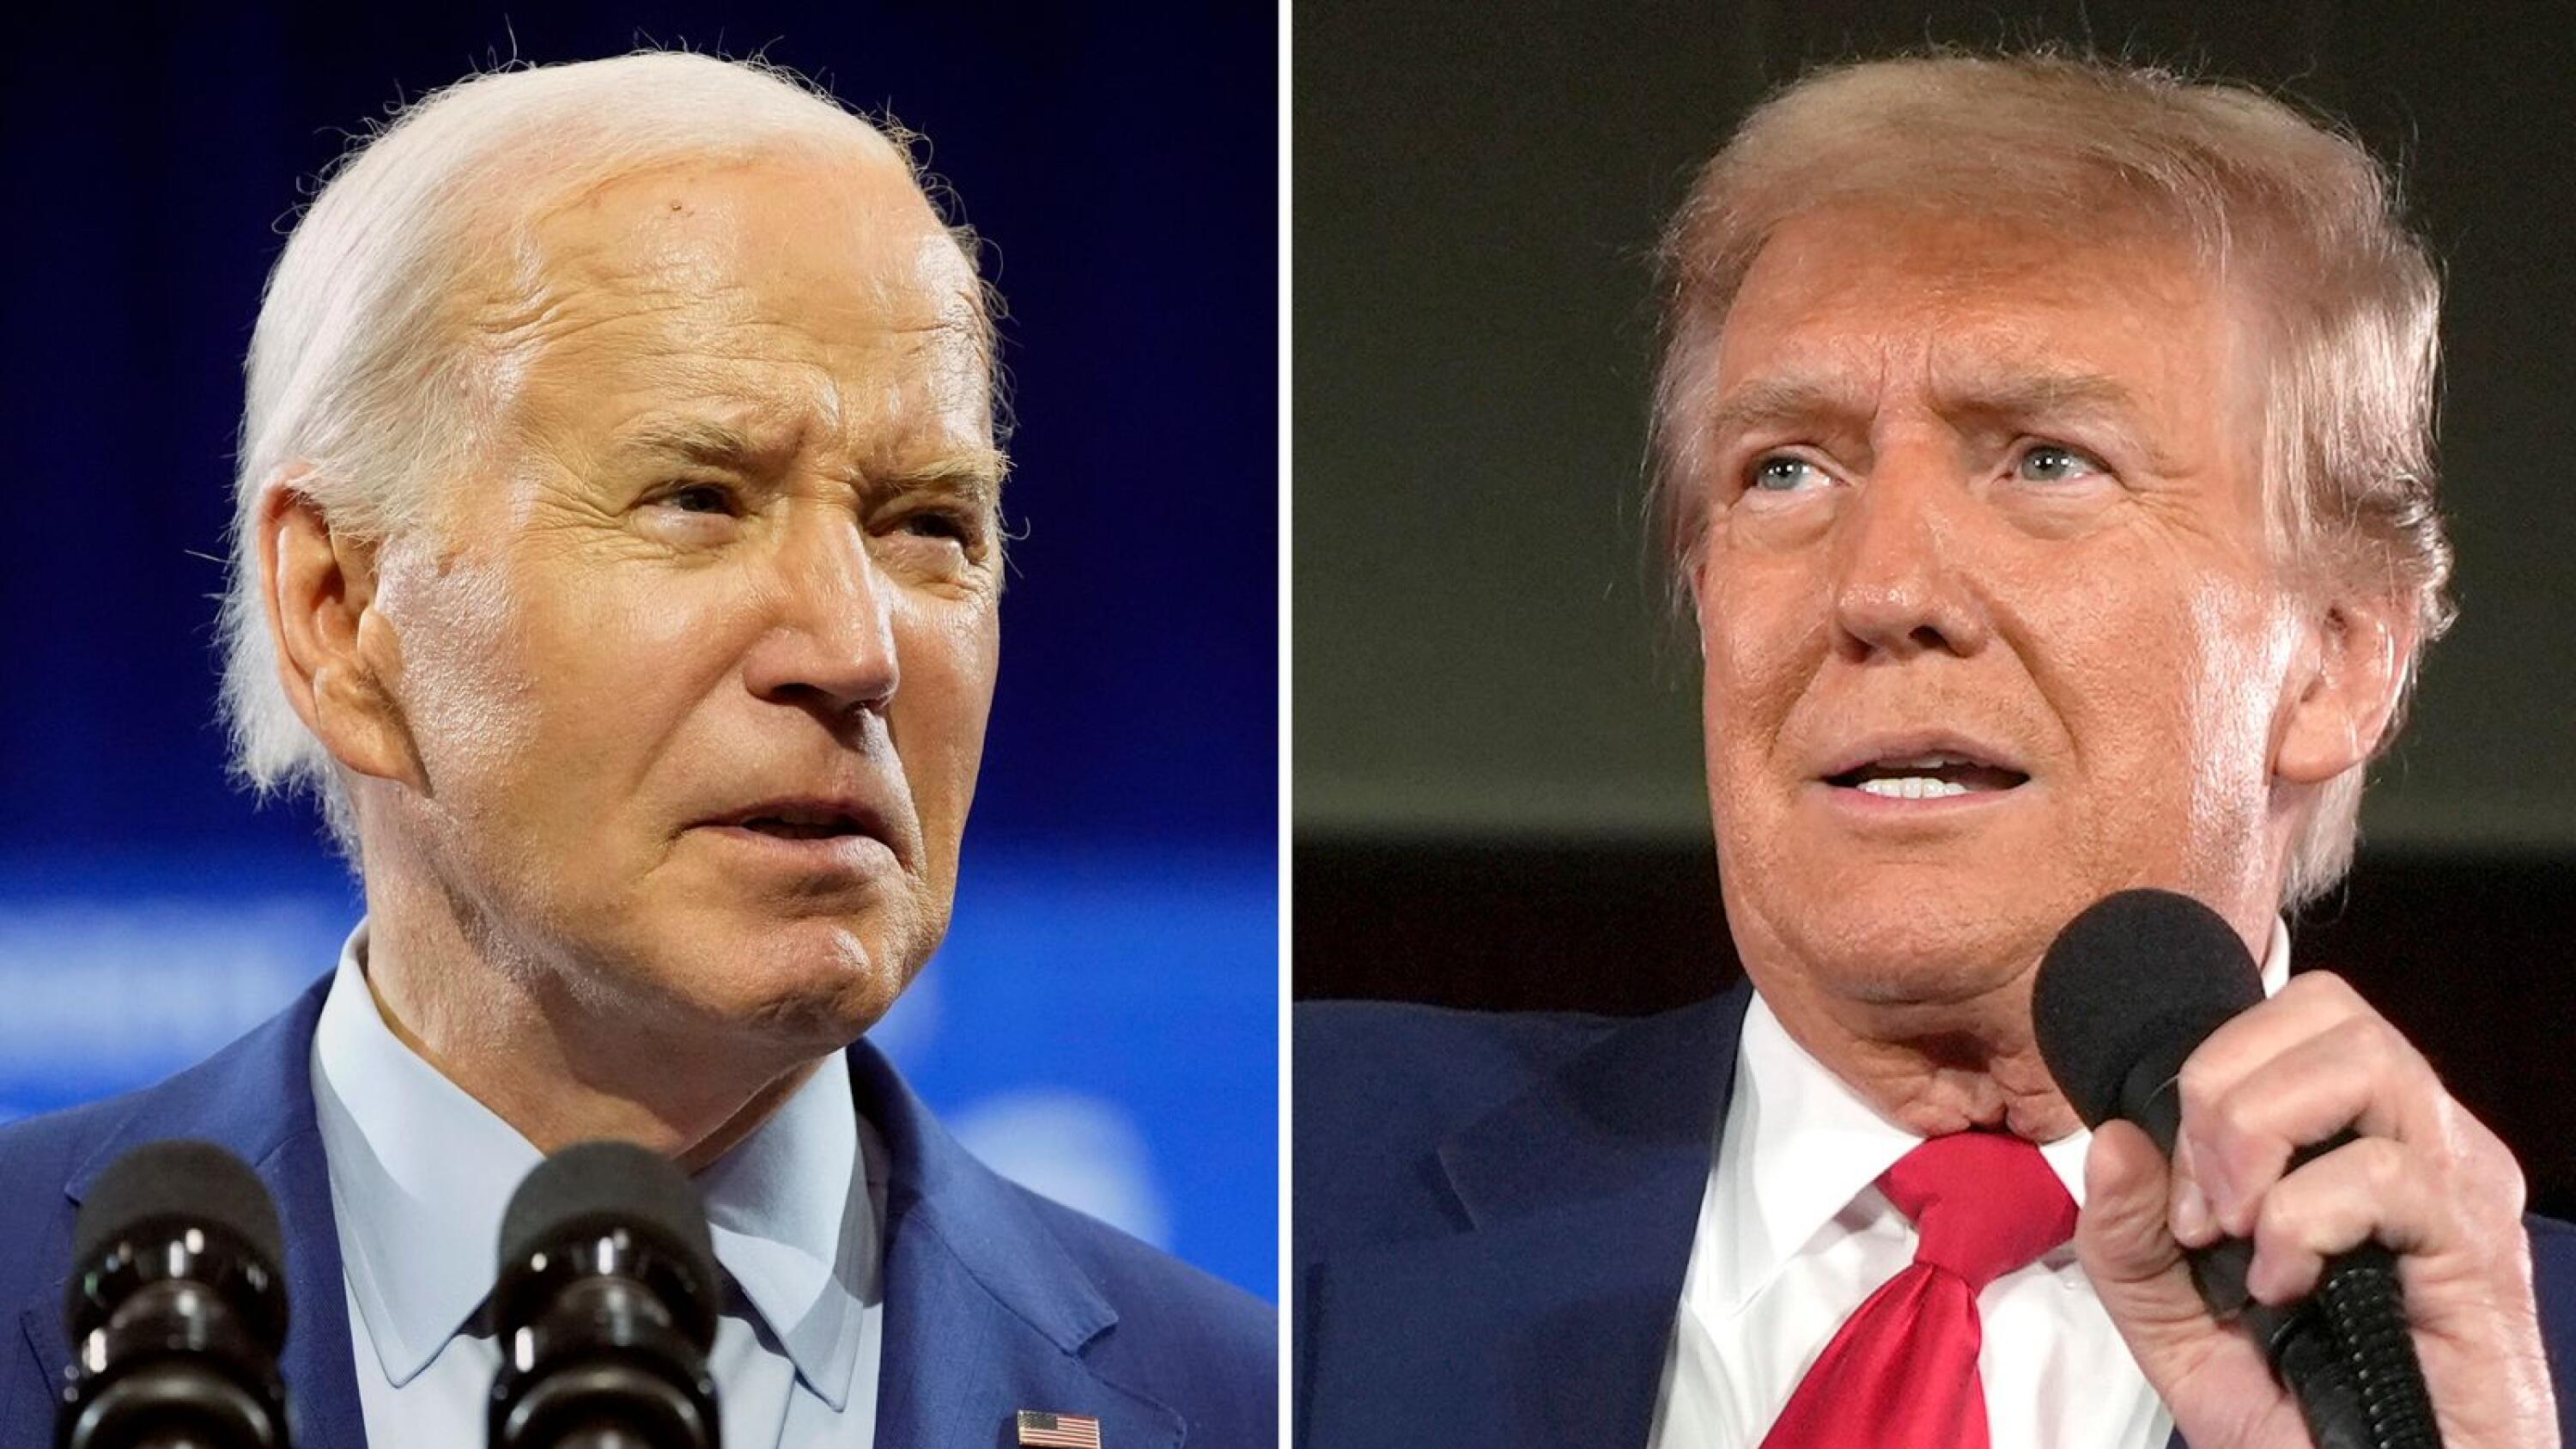 What science tells us about Biden, Trump and evaluating an aging brain